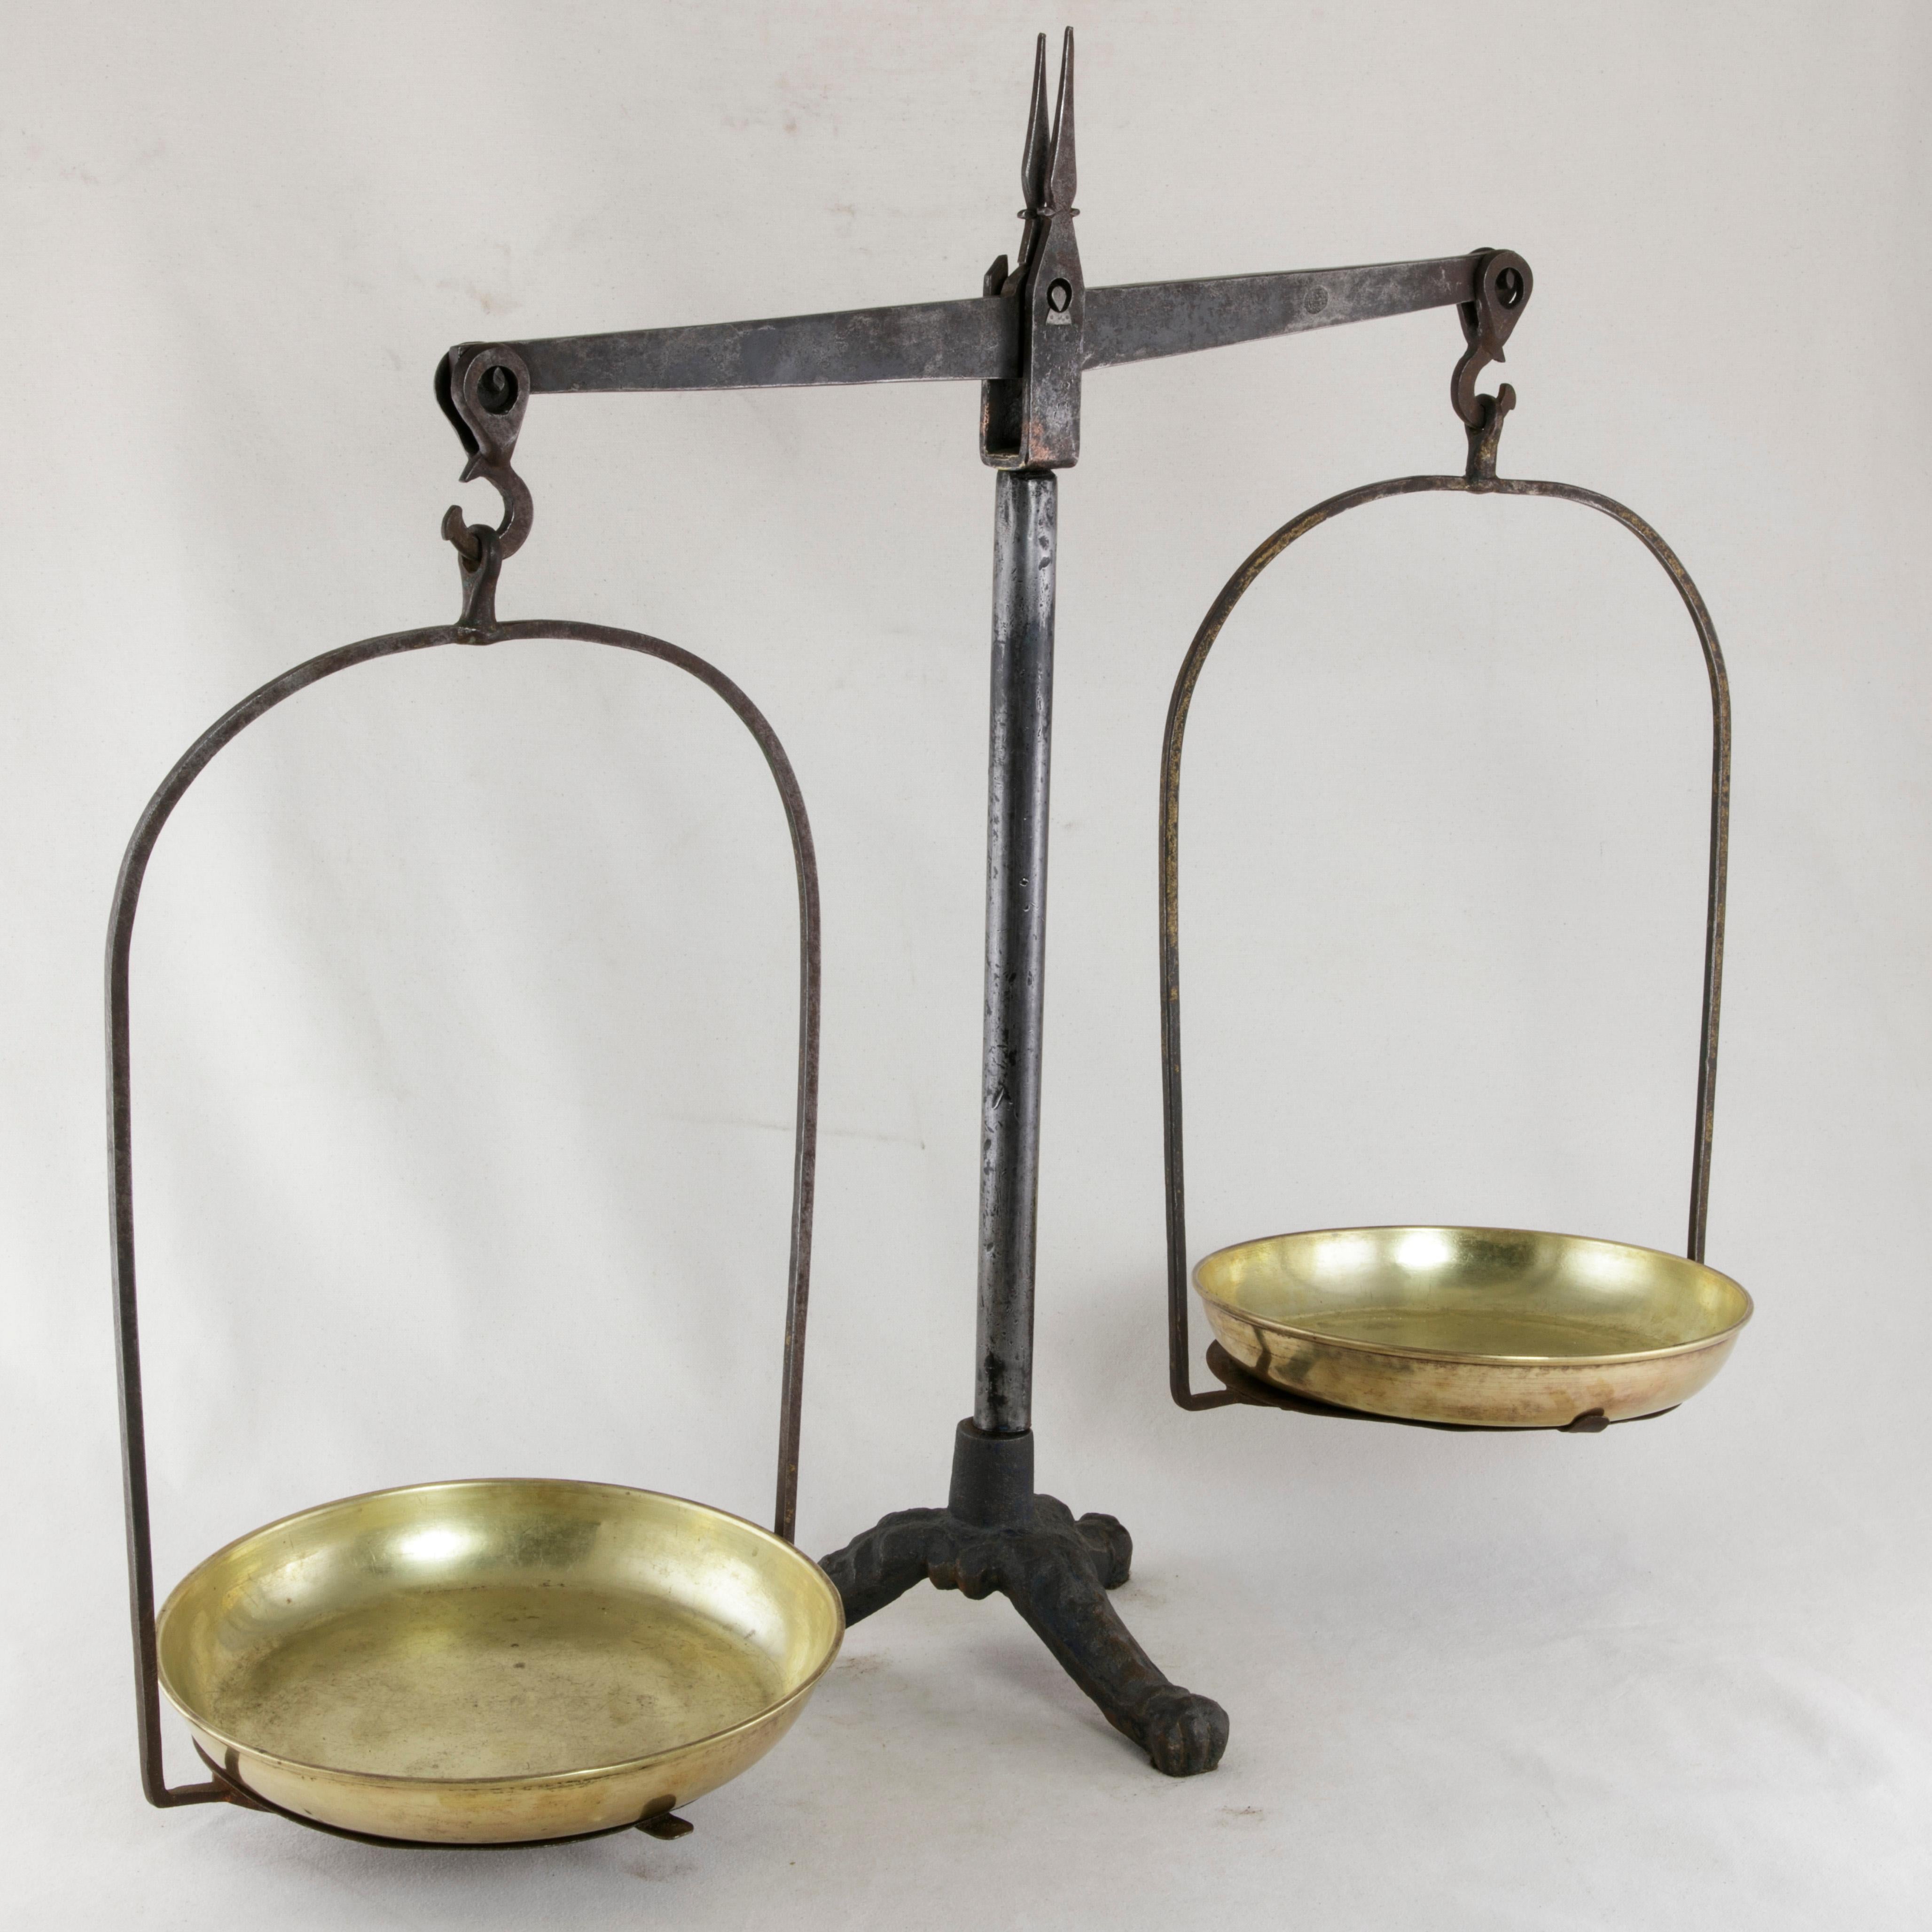 From the region of Normandy, France, this set of late 19th century iron scales features its two original brass pans. The central iron rod rests on a cast iron tripod base detailed with leaves and finished with claw feet. A wonderful decorative